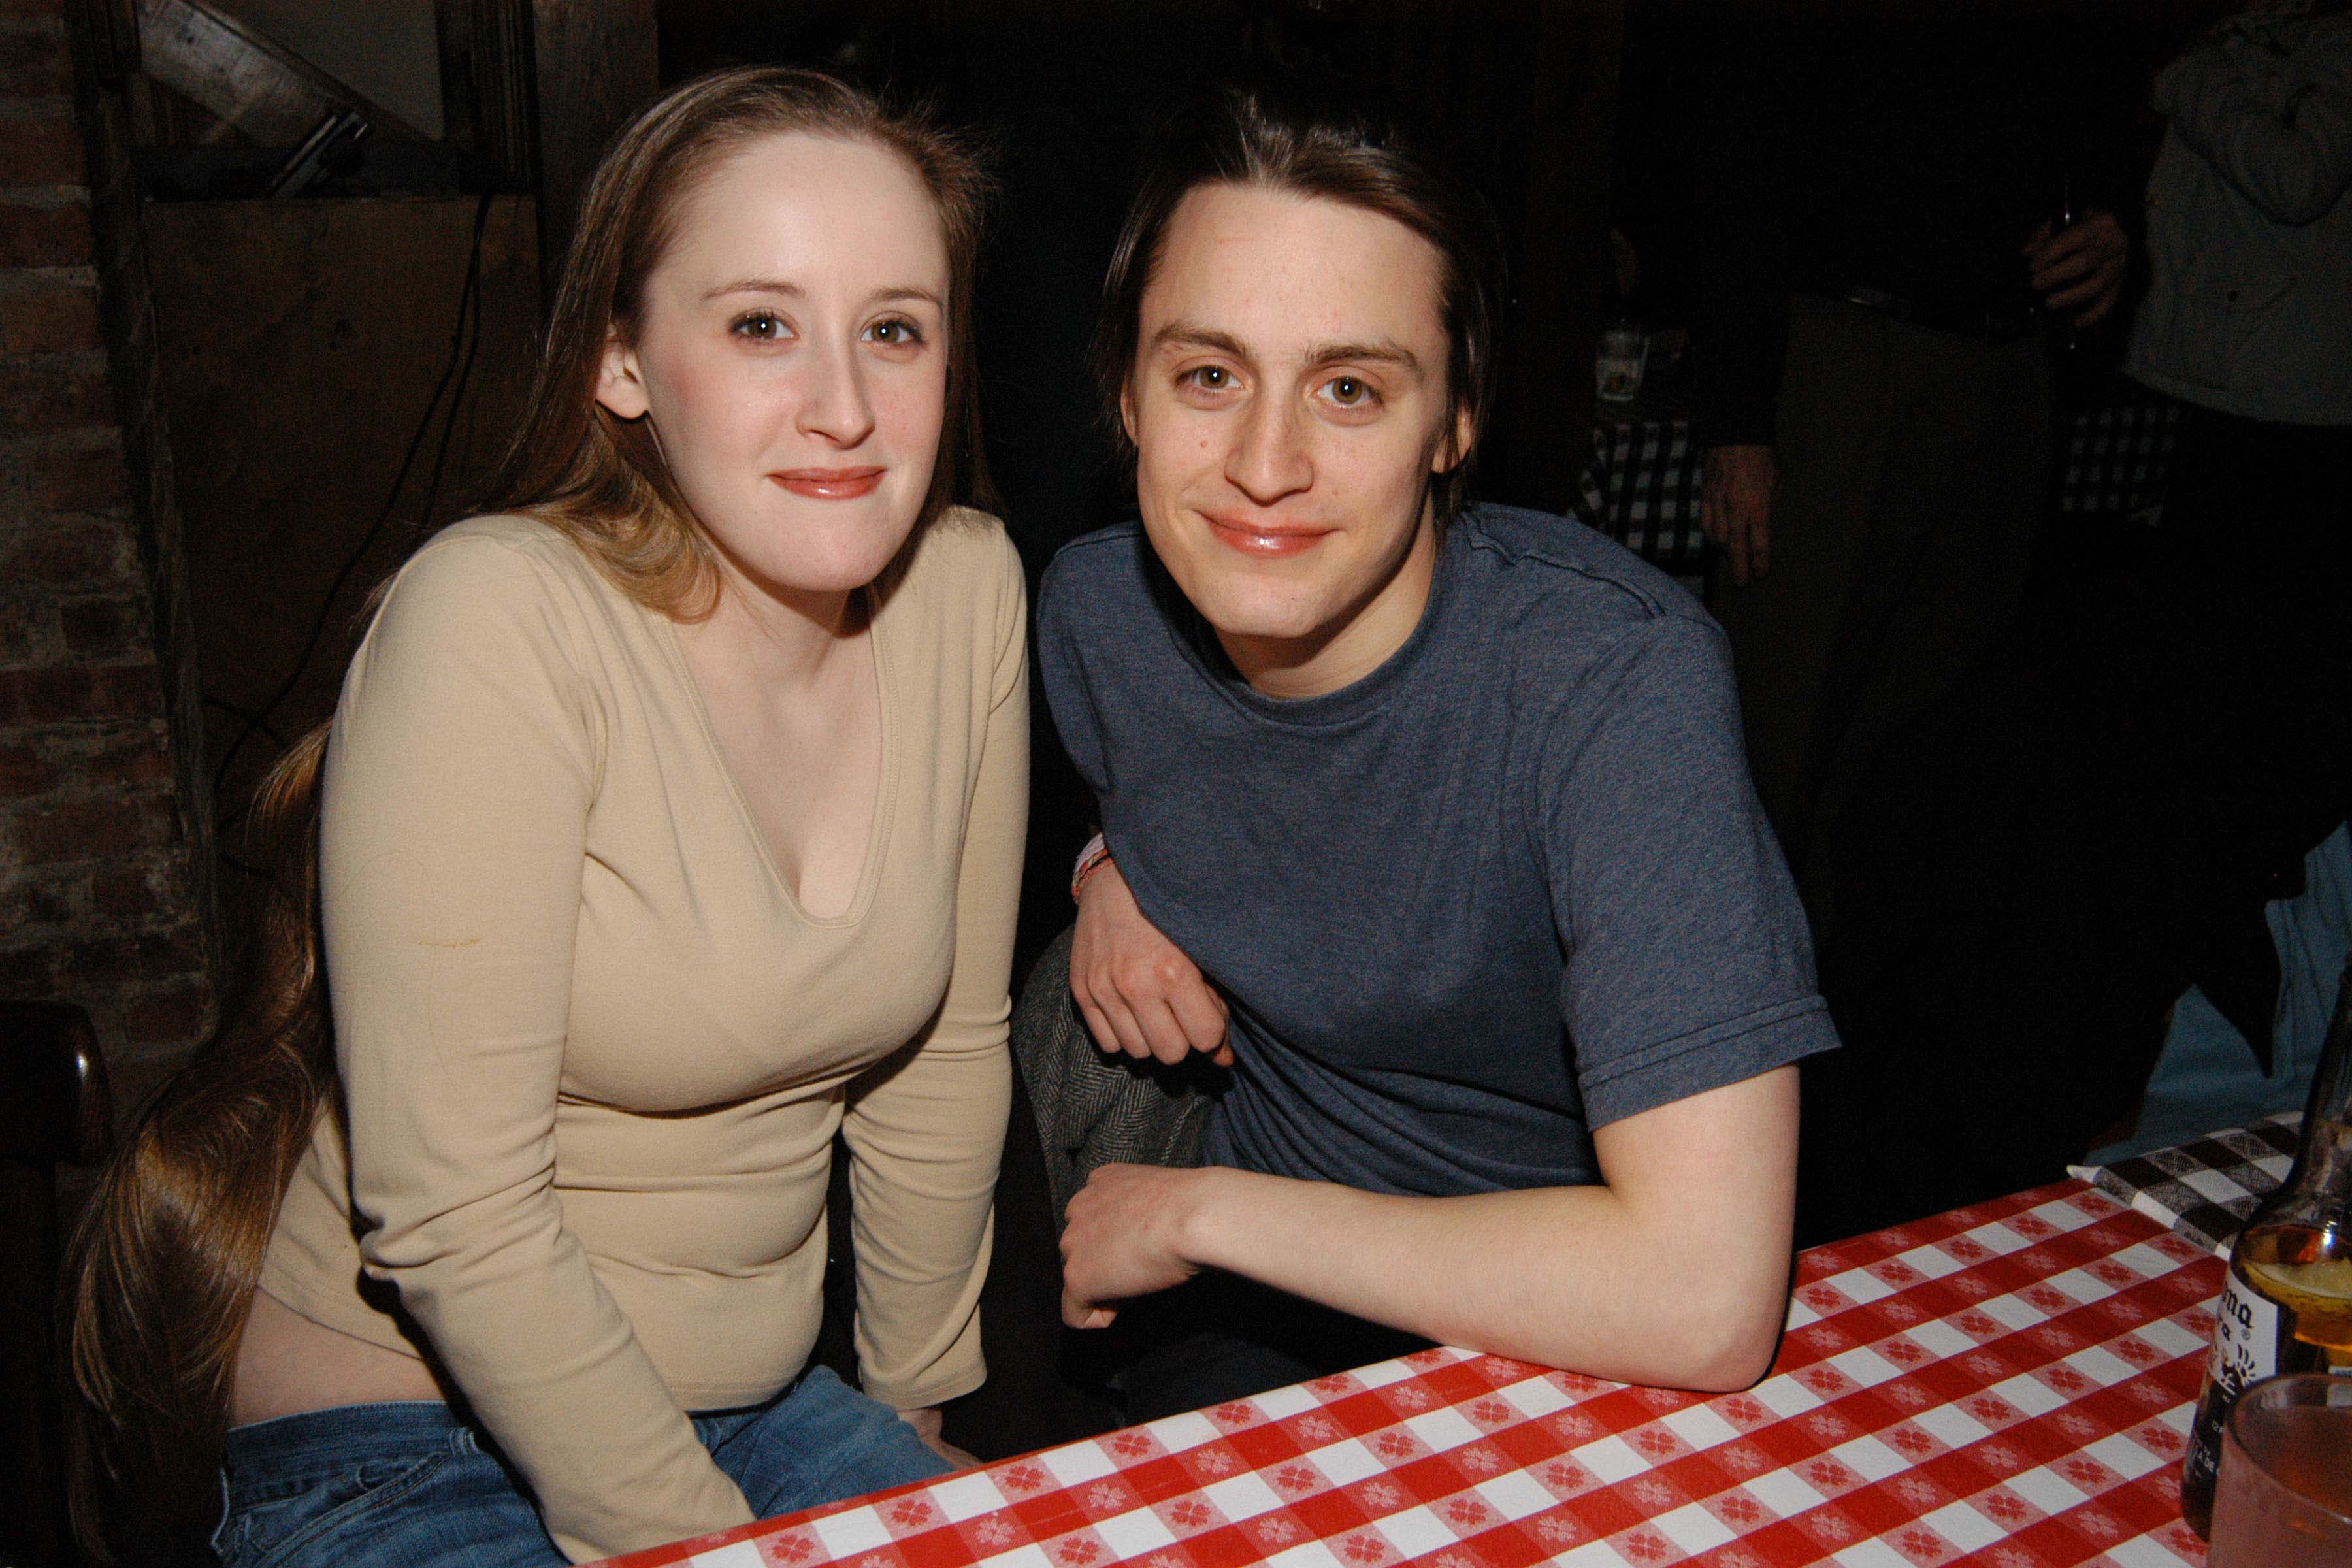 Quinn Culkin and Kieran Culkin at the OPENING NIGHT PARTY for Second Stage Theatre’s production of Theresa Rebeck’s THE SCENE on January 11, 2007 in New York City. | Source: Getty Images